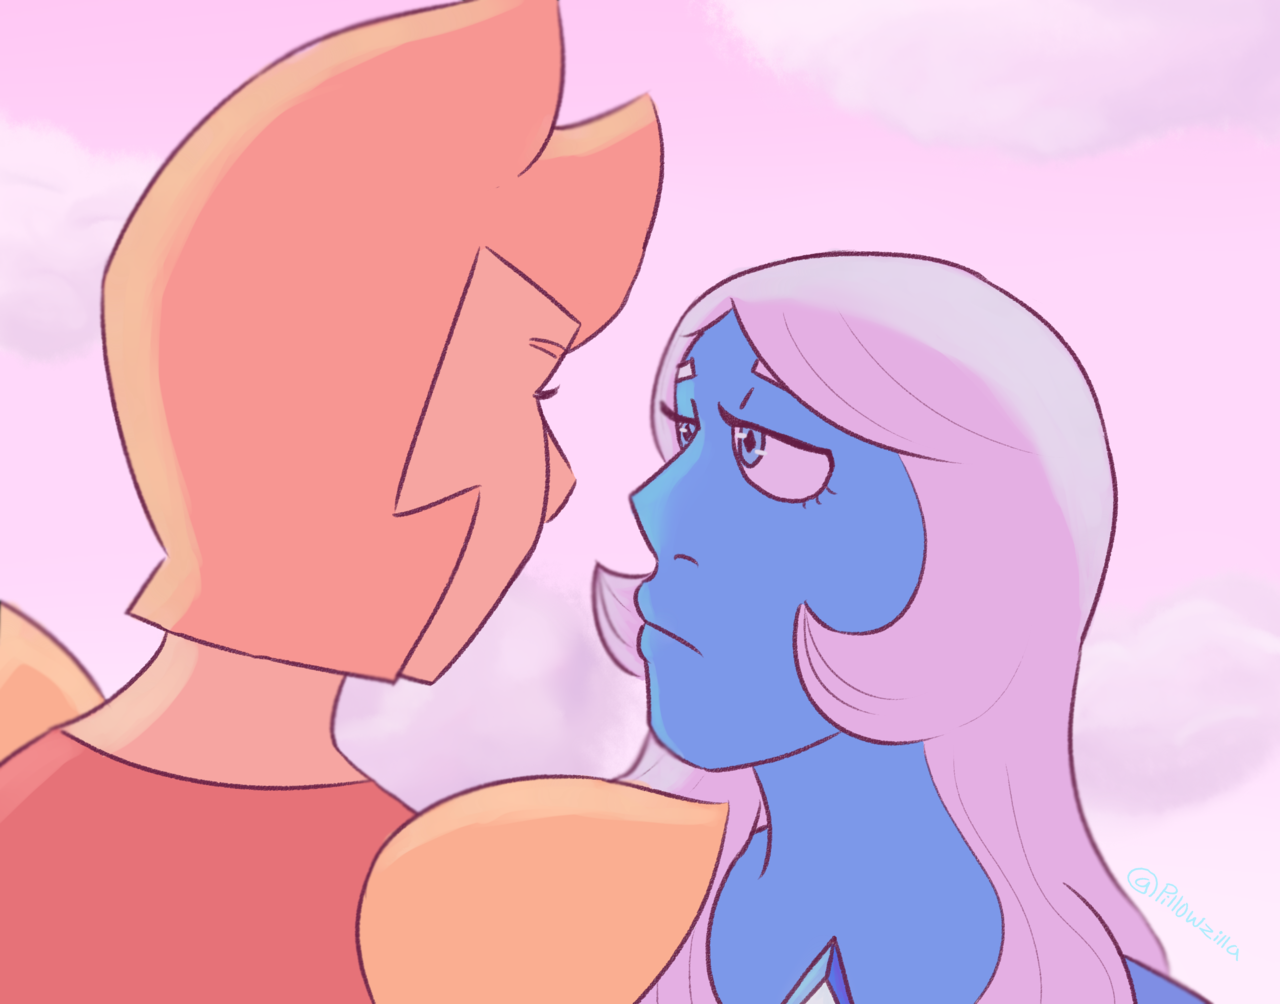 a bellow diamond thing I did and also I don’t care if you think they’re sisters they’re rock people :)